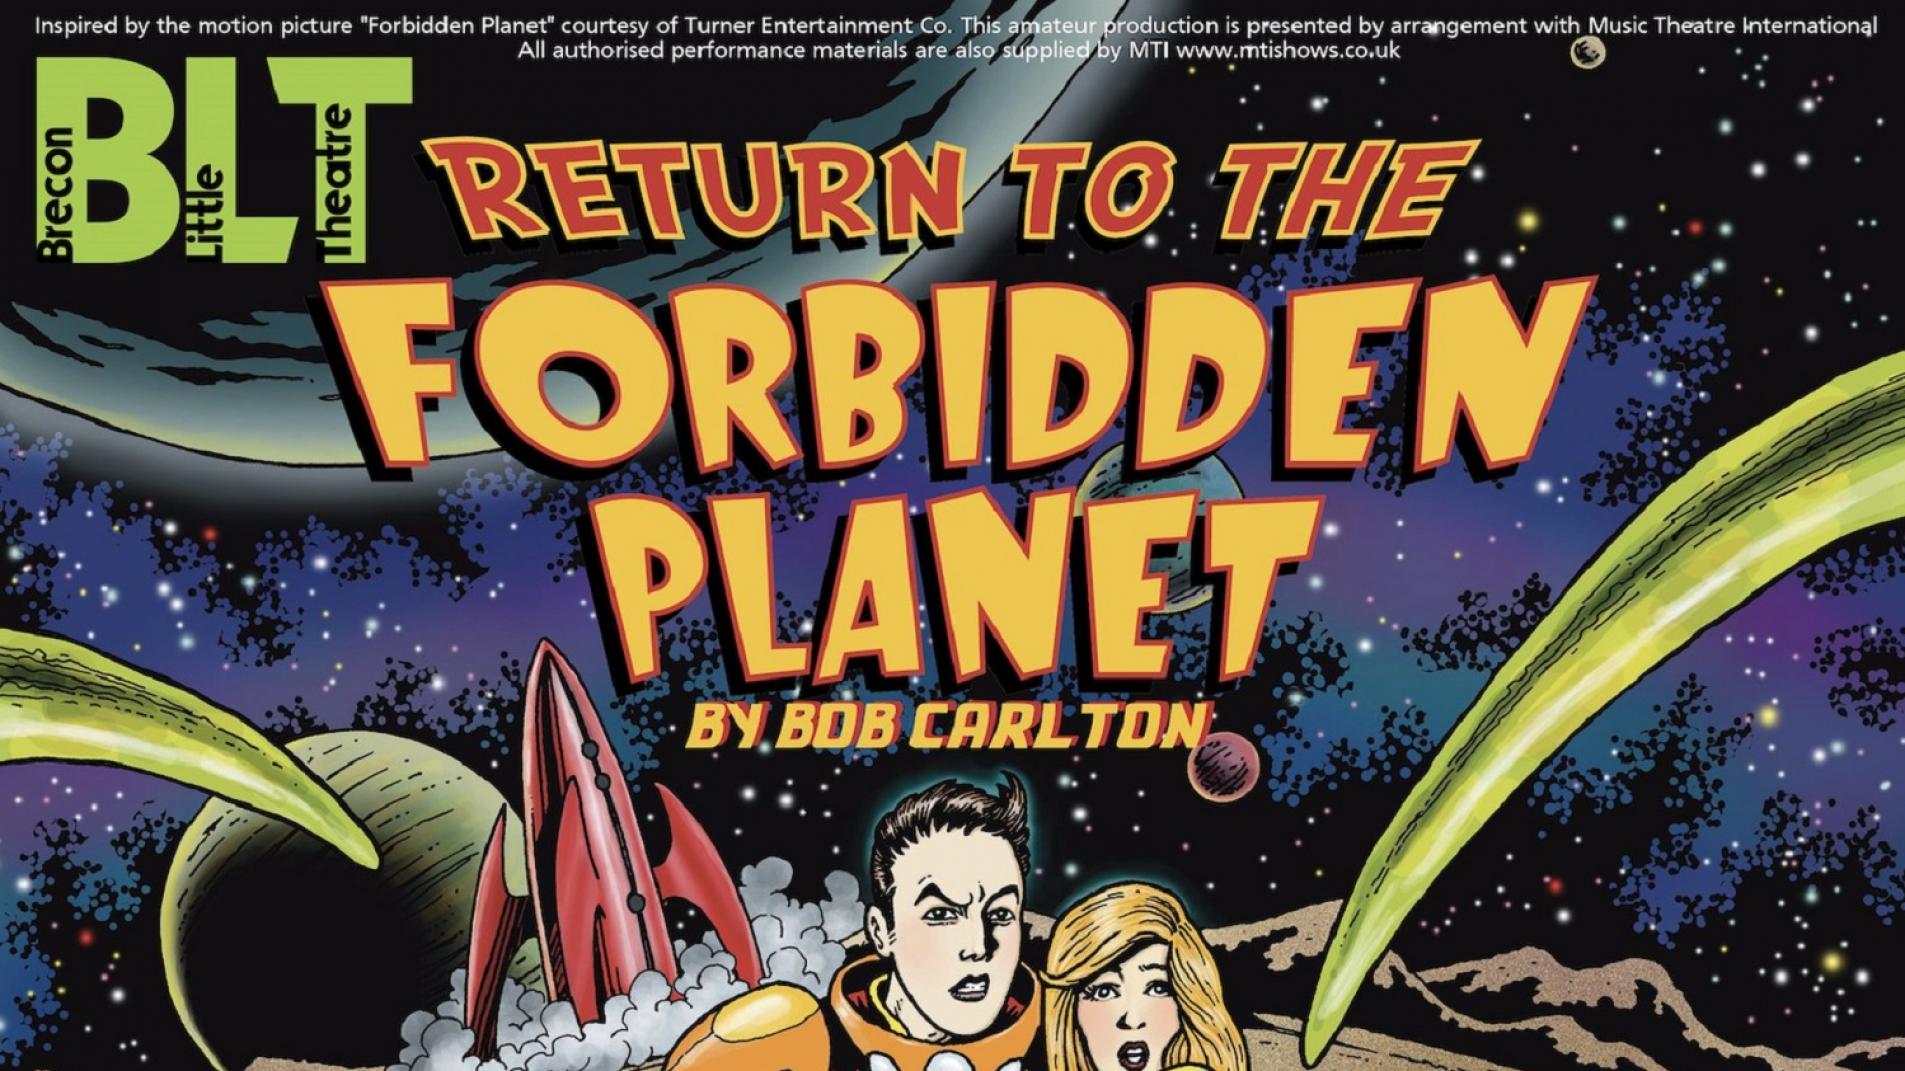 Back to the Forbidden Planet